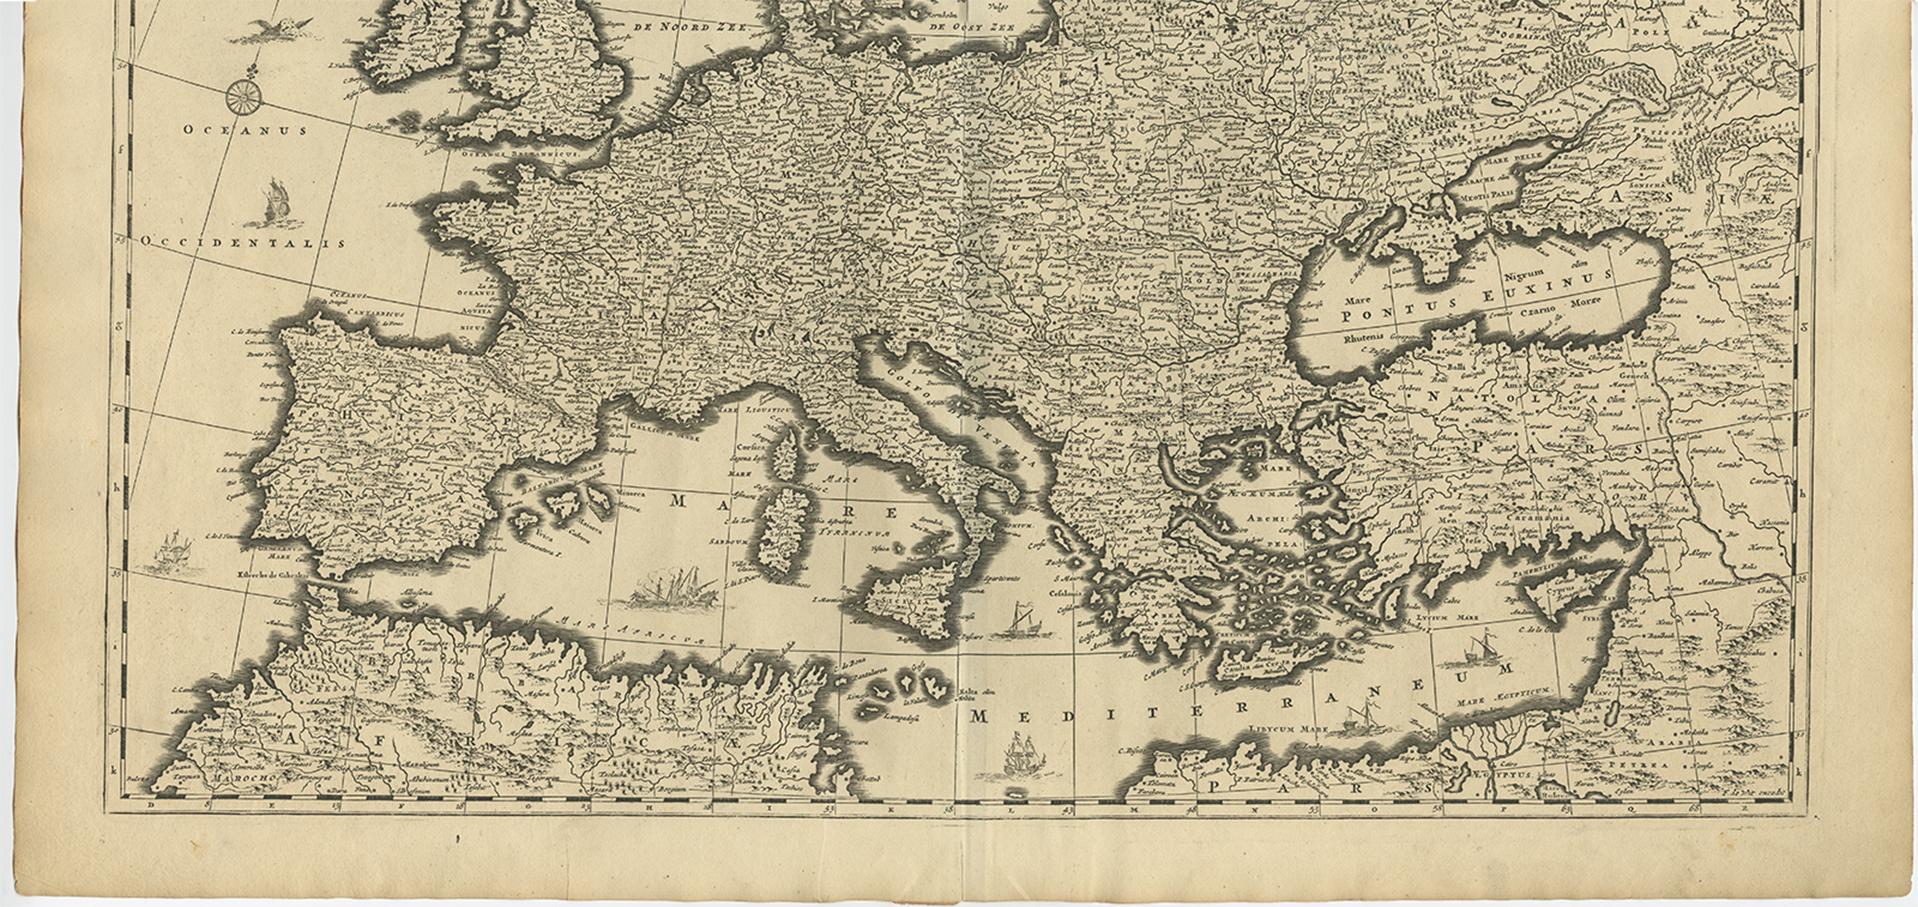 This is an attractive historical map of Europe created by Frederick de Wit, published around 1690. Here's a detailed description of the map and additional context about its creation:

### Description of the Map:

- **Geographical Coverage:** The map